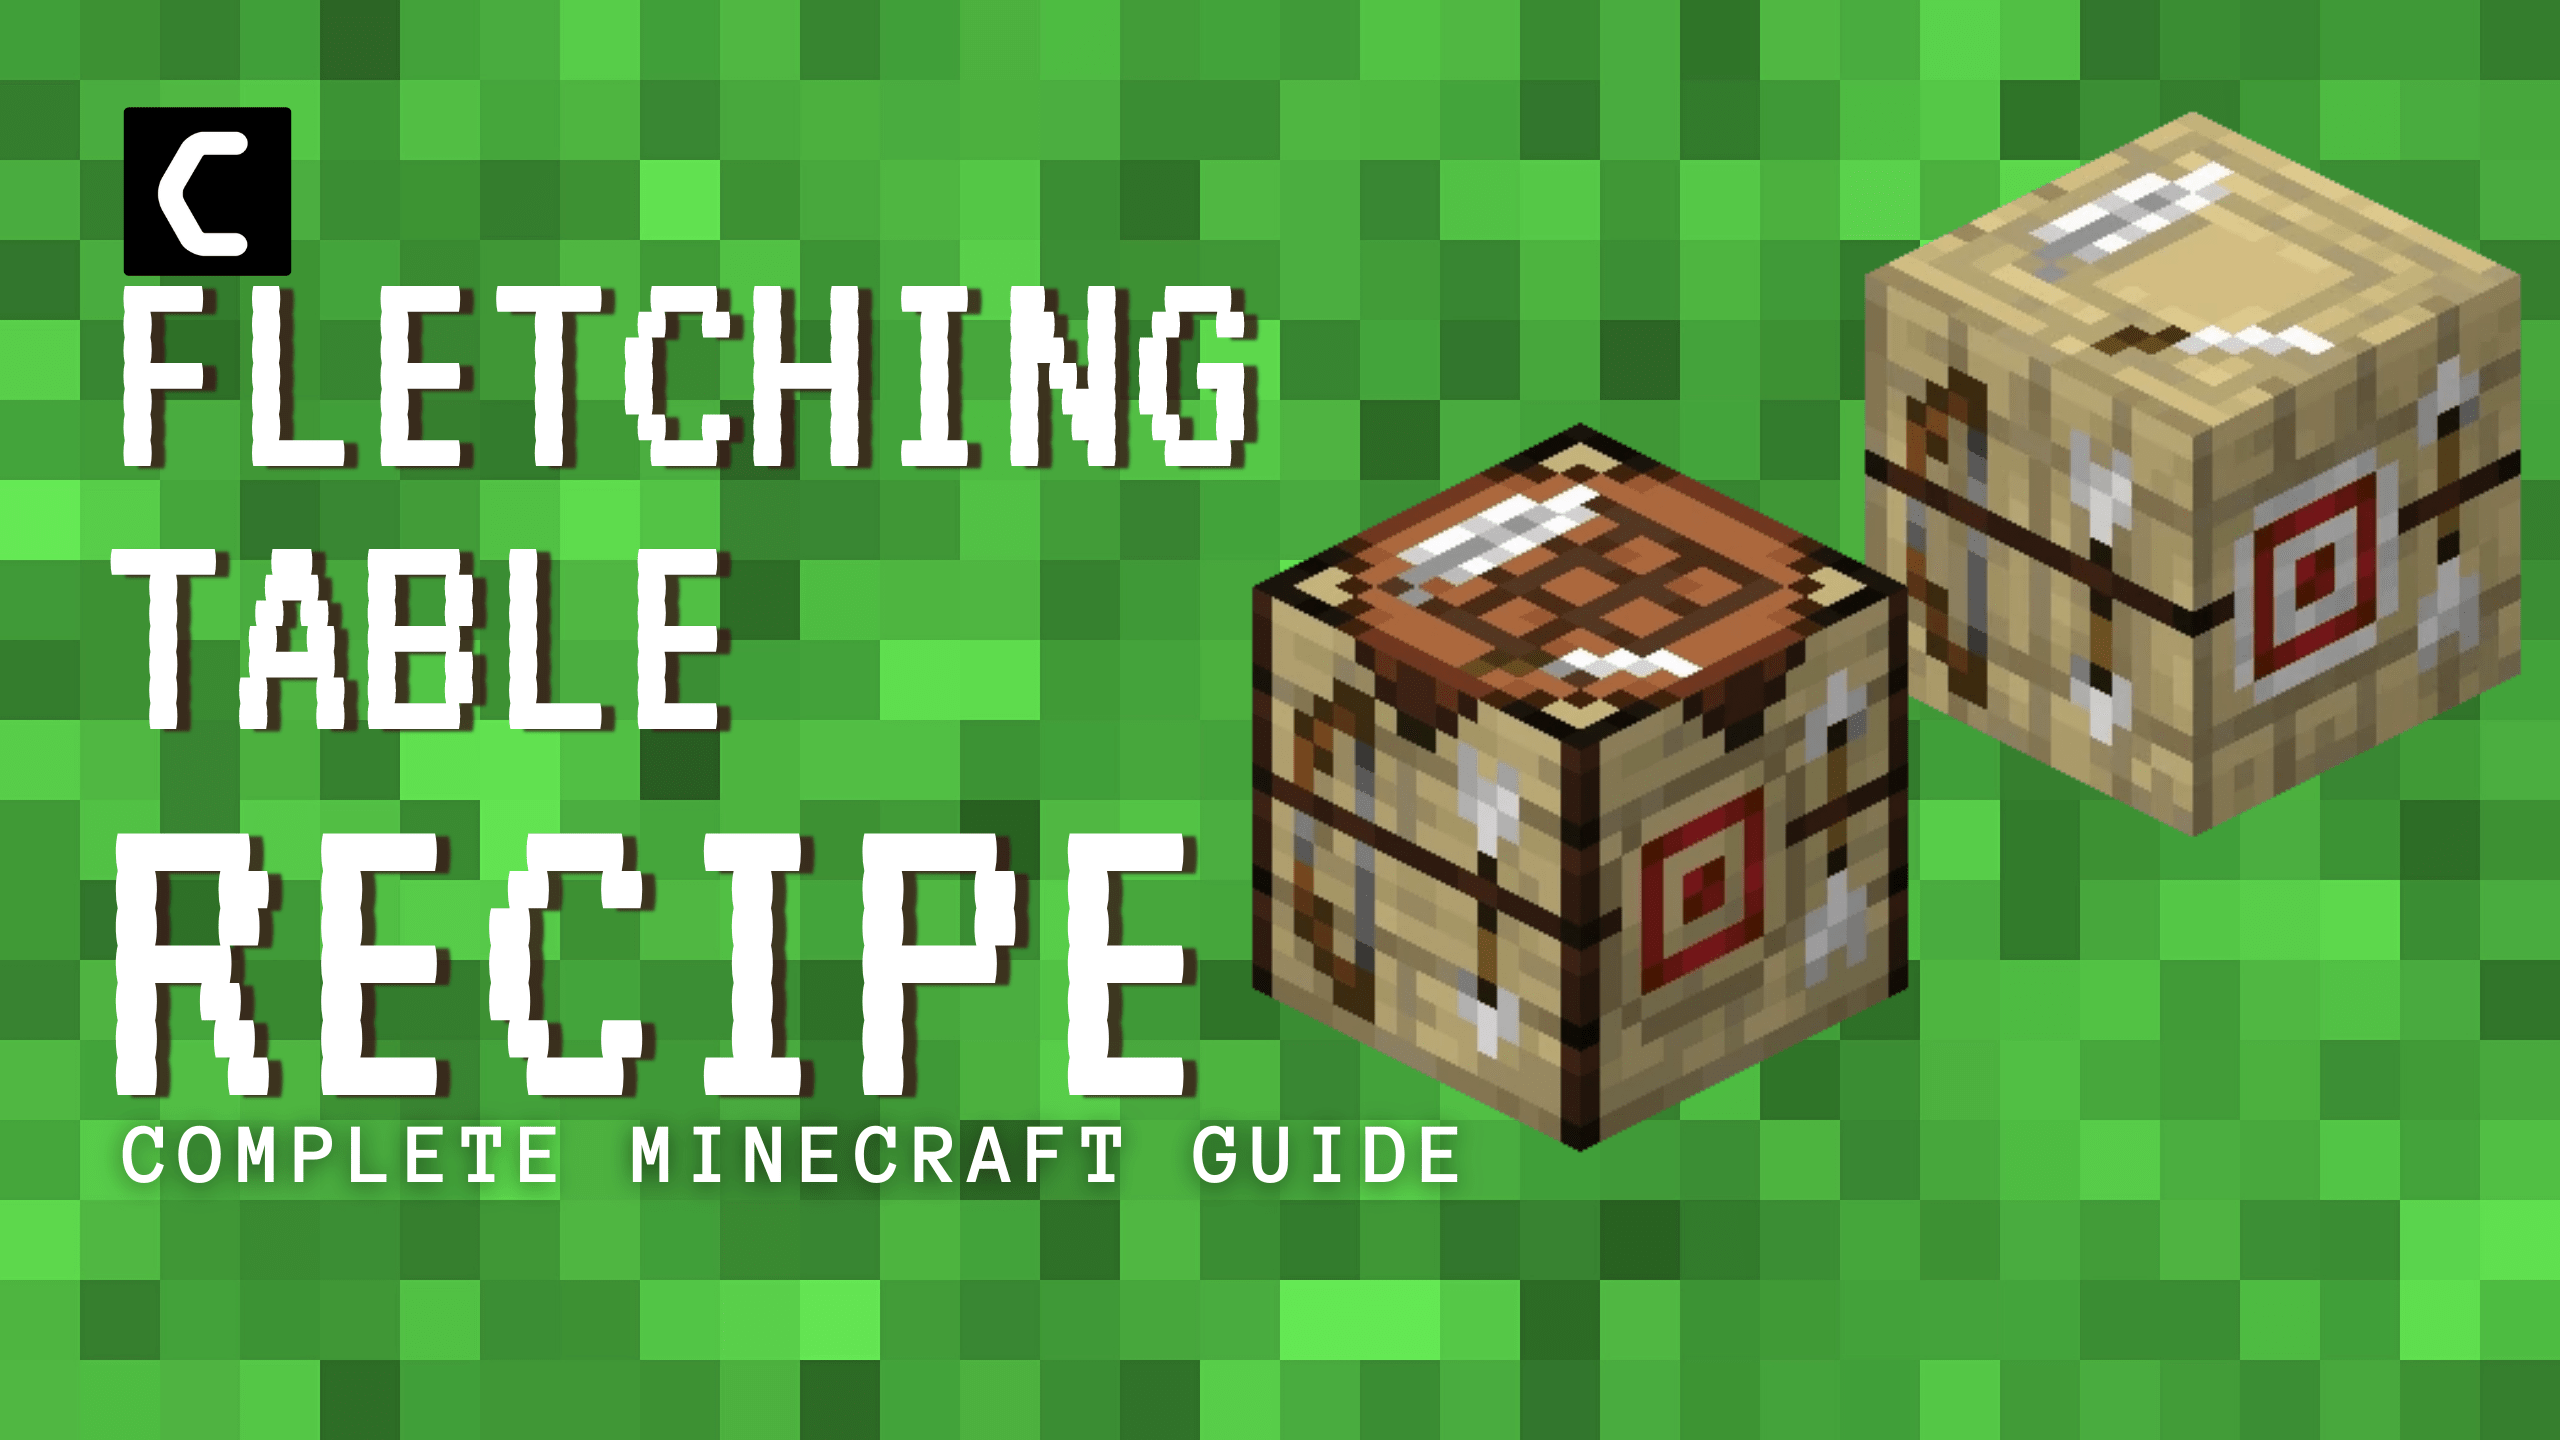 How to Make Fletching Table in Minecraft